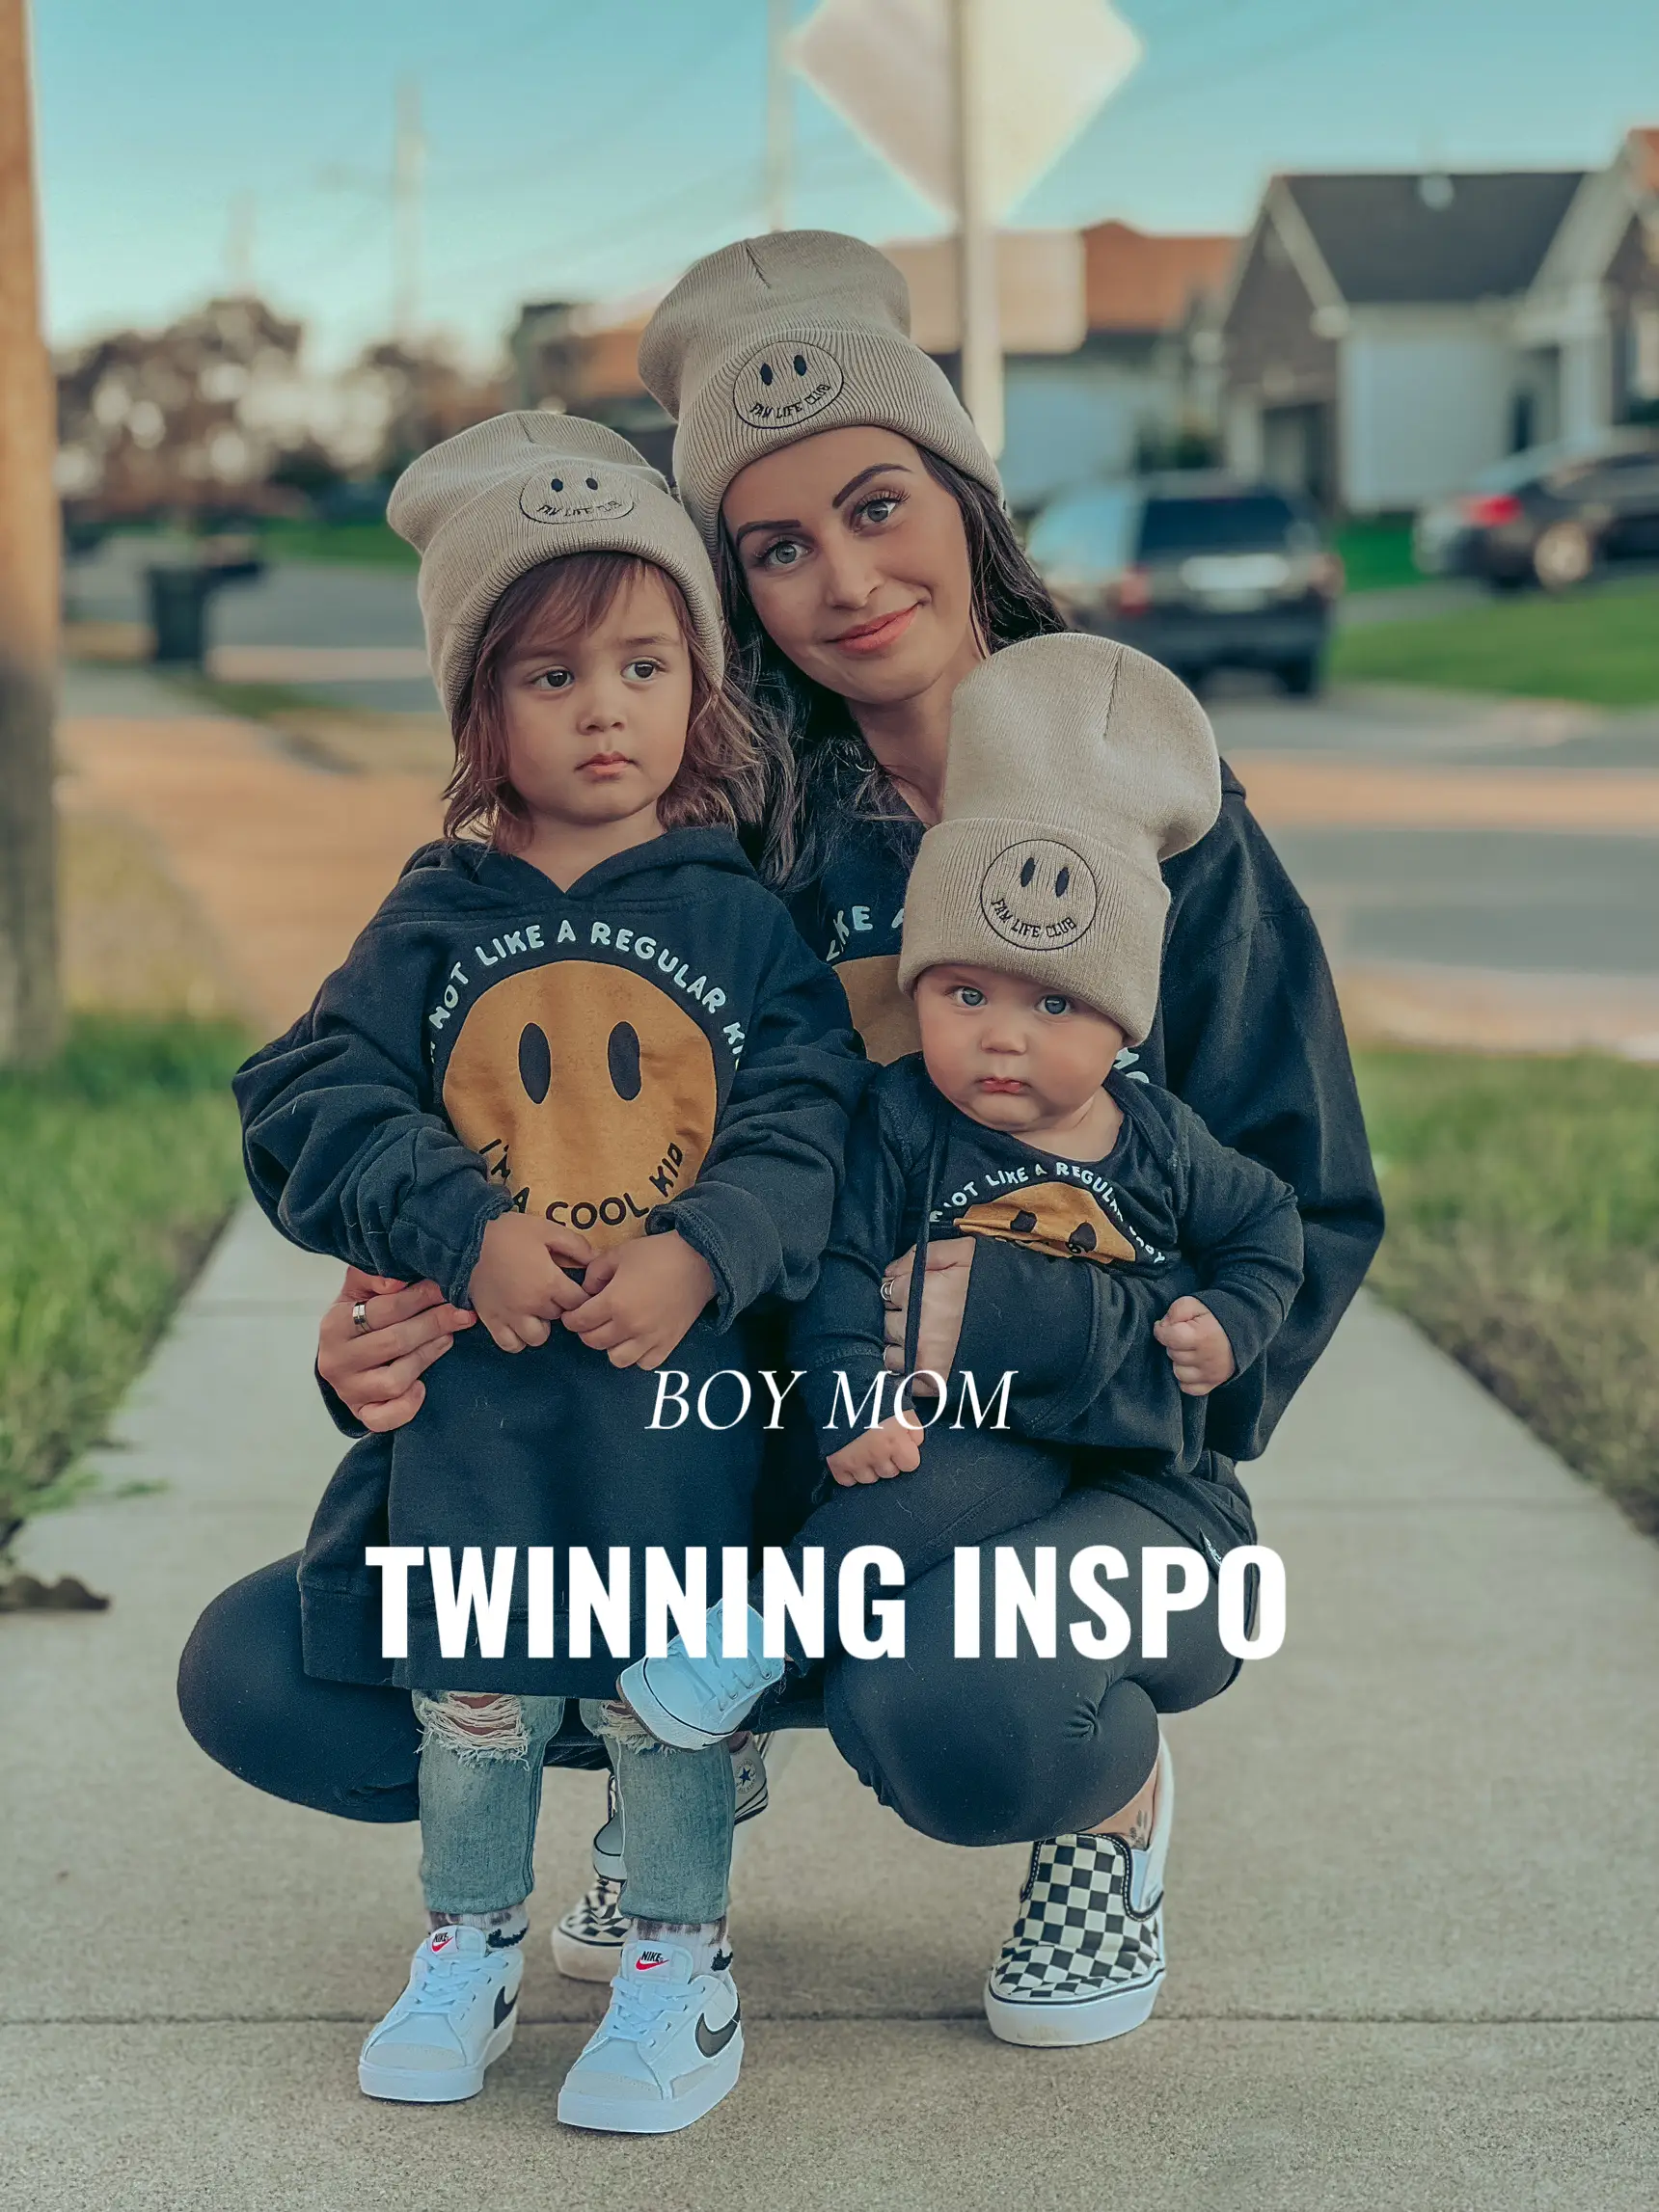 Twinning is winning + we love how cozy + cool these twins looks in